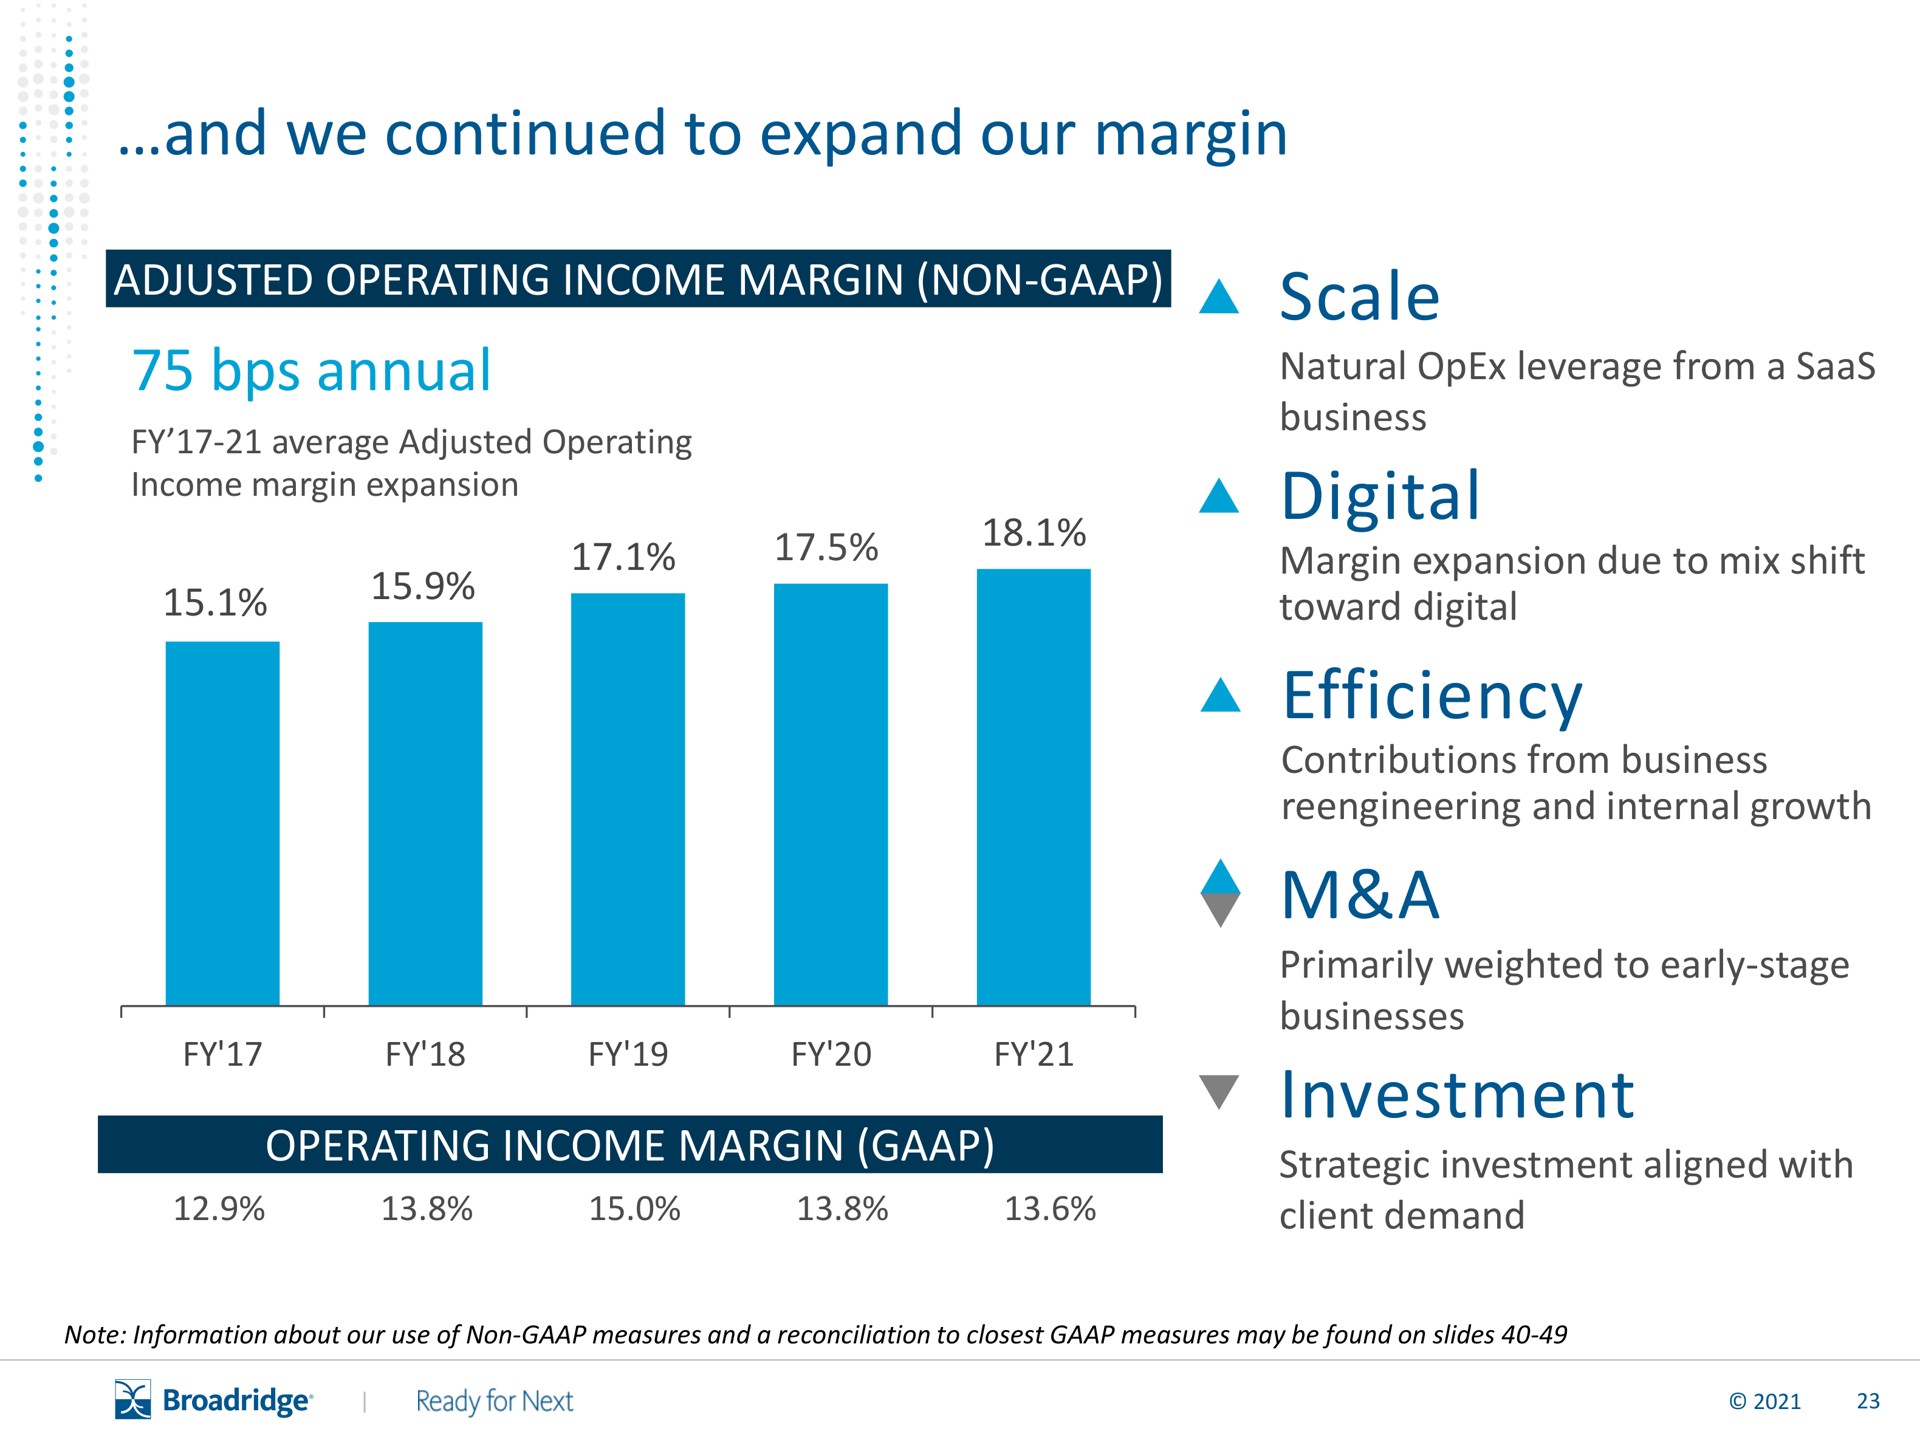 and we continued to expand our margin annual scale digital efficiency a investment | Broadridge Financial Solutions